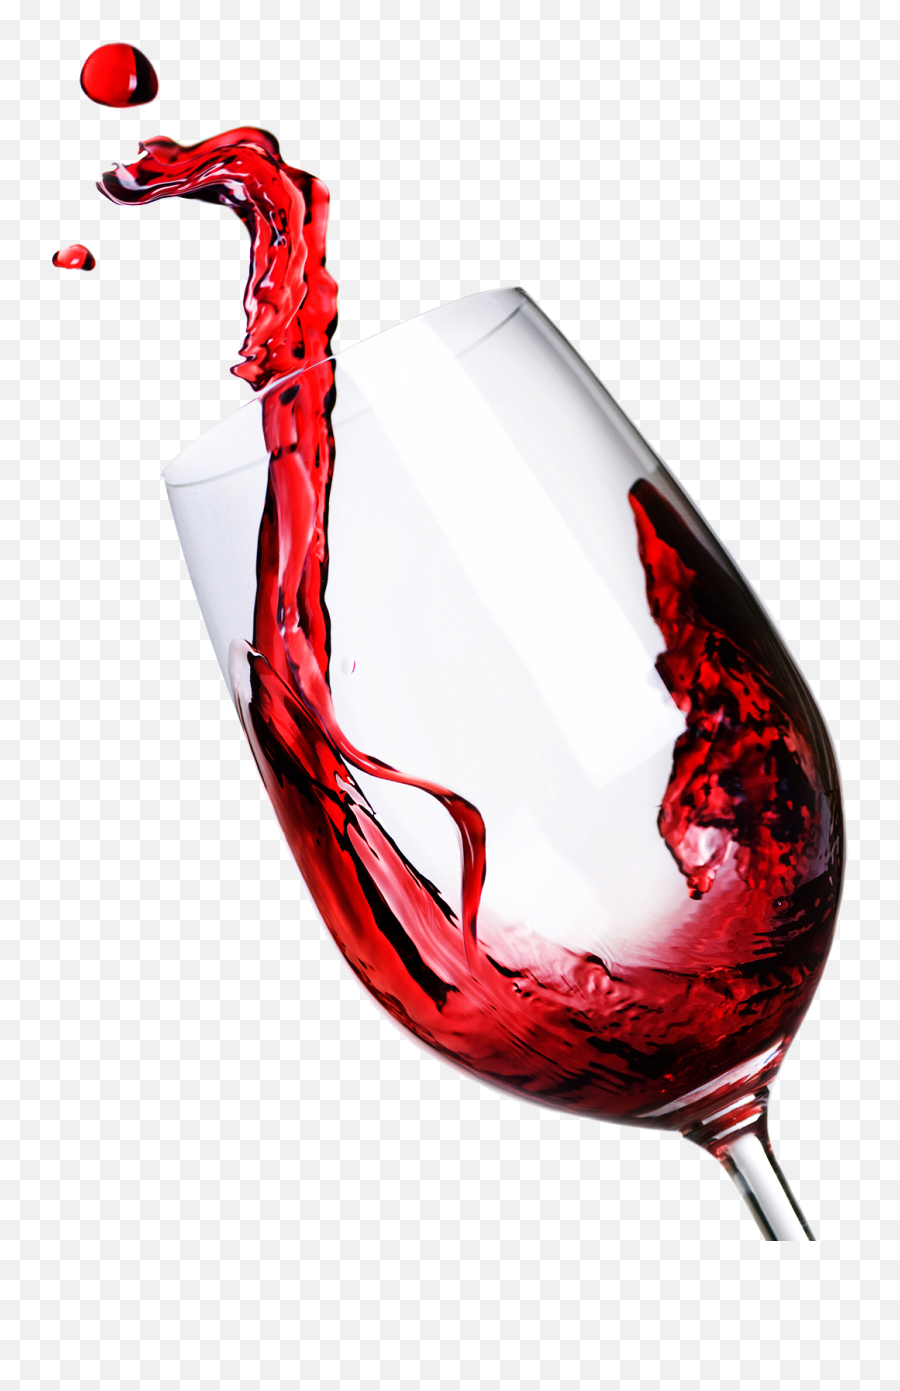 Transparent Wine Glass Png - Glass Of Wine Png Clipart Transparent Wine In Glass Emoji,Wine Glass Clipart